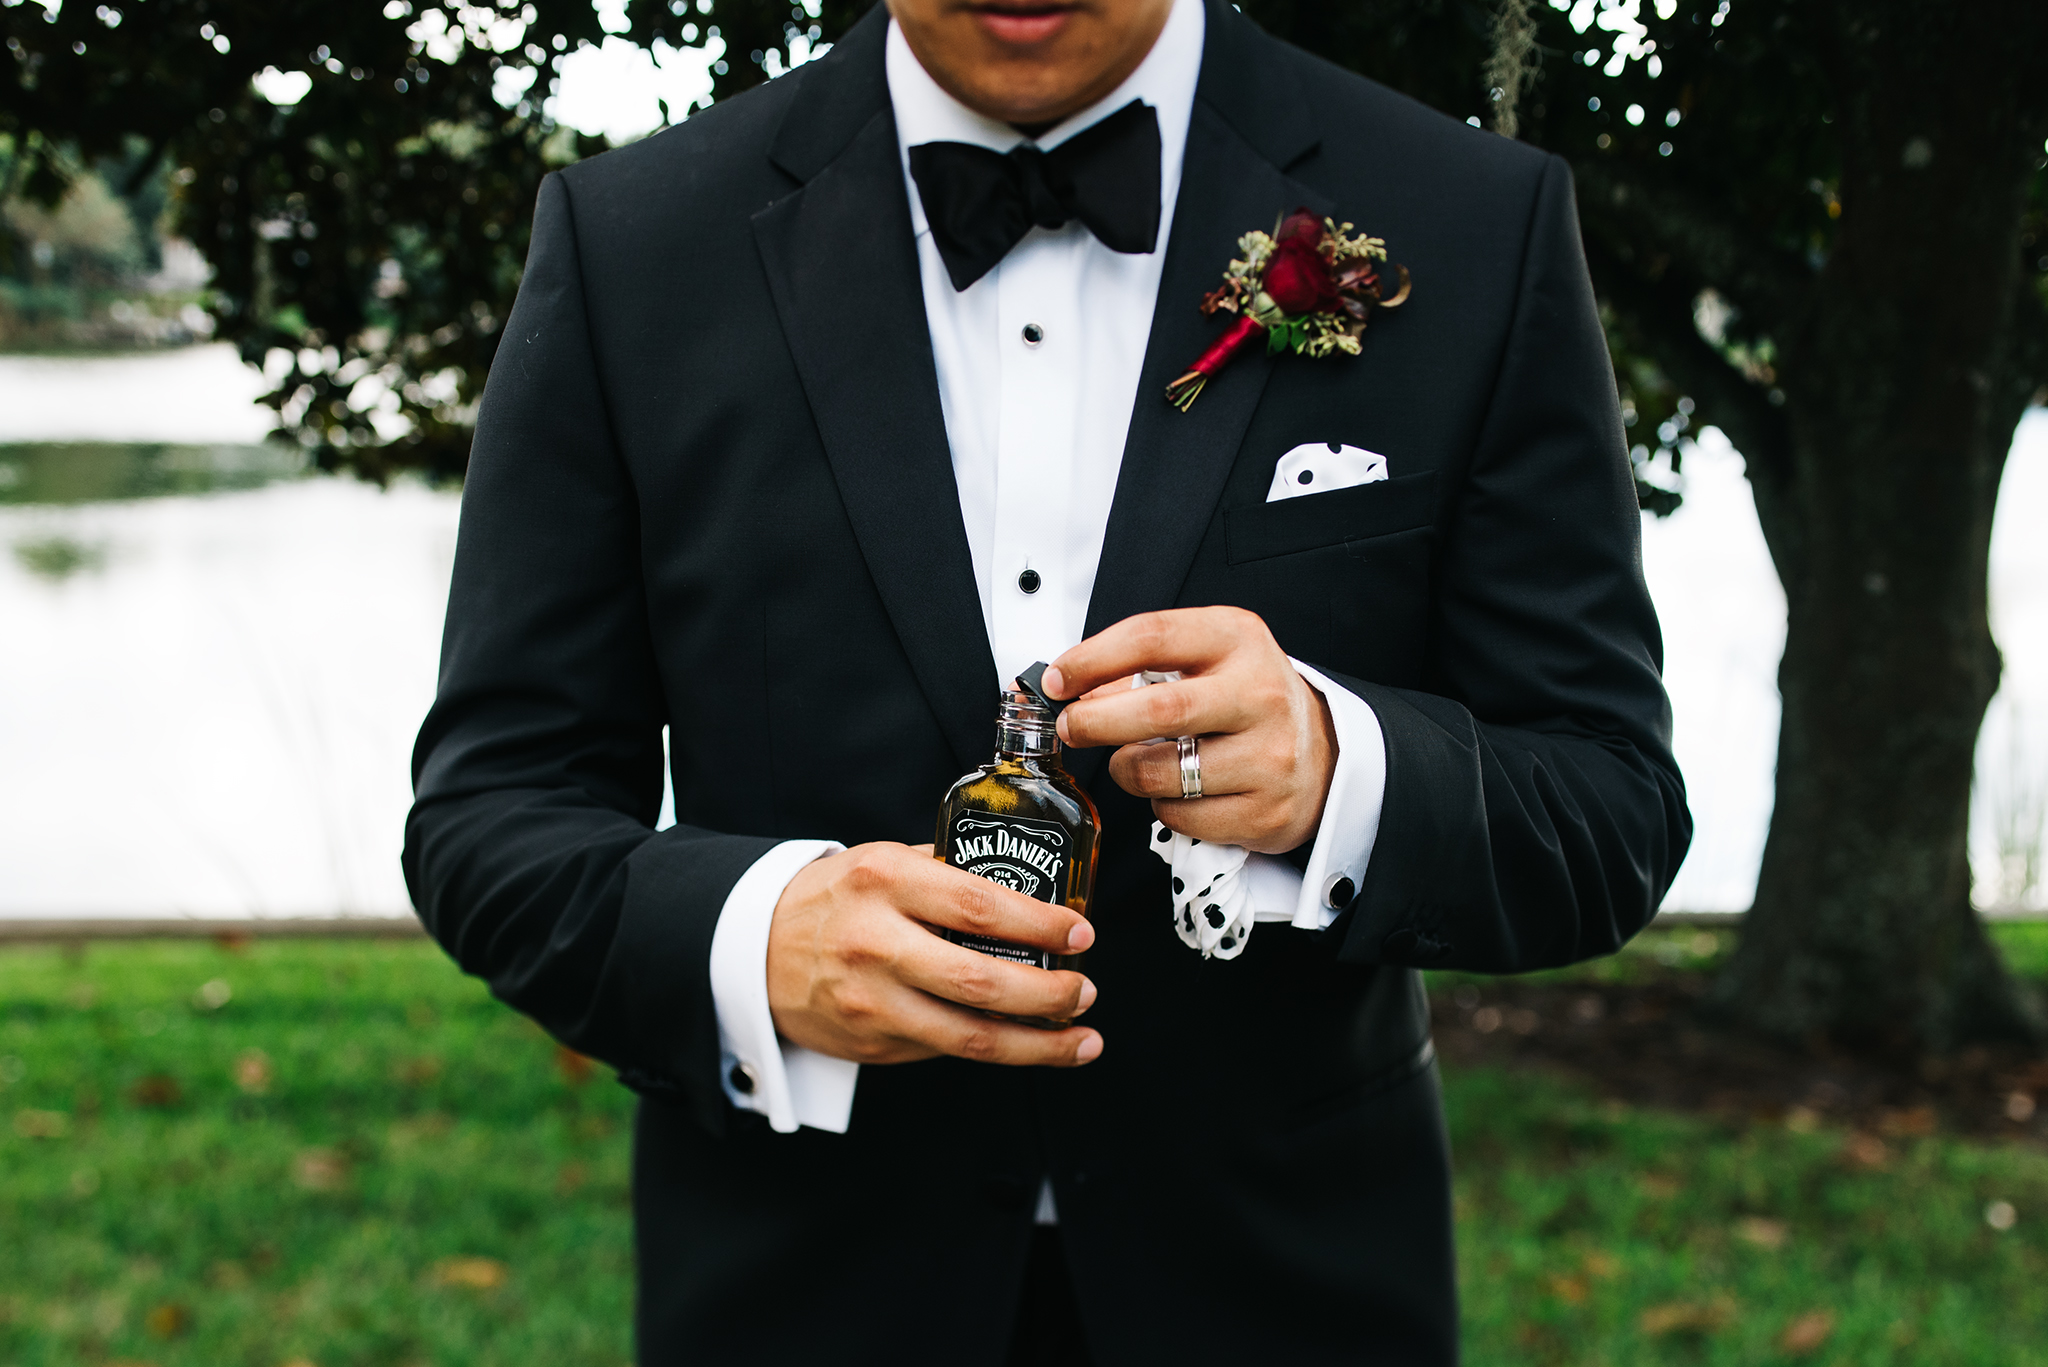 Tuxedo Q&A: How Can I Be Sure My Rental Tuxedo Will Fit?